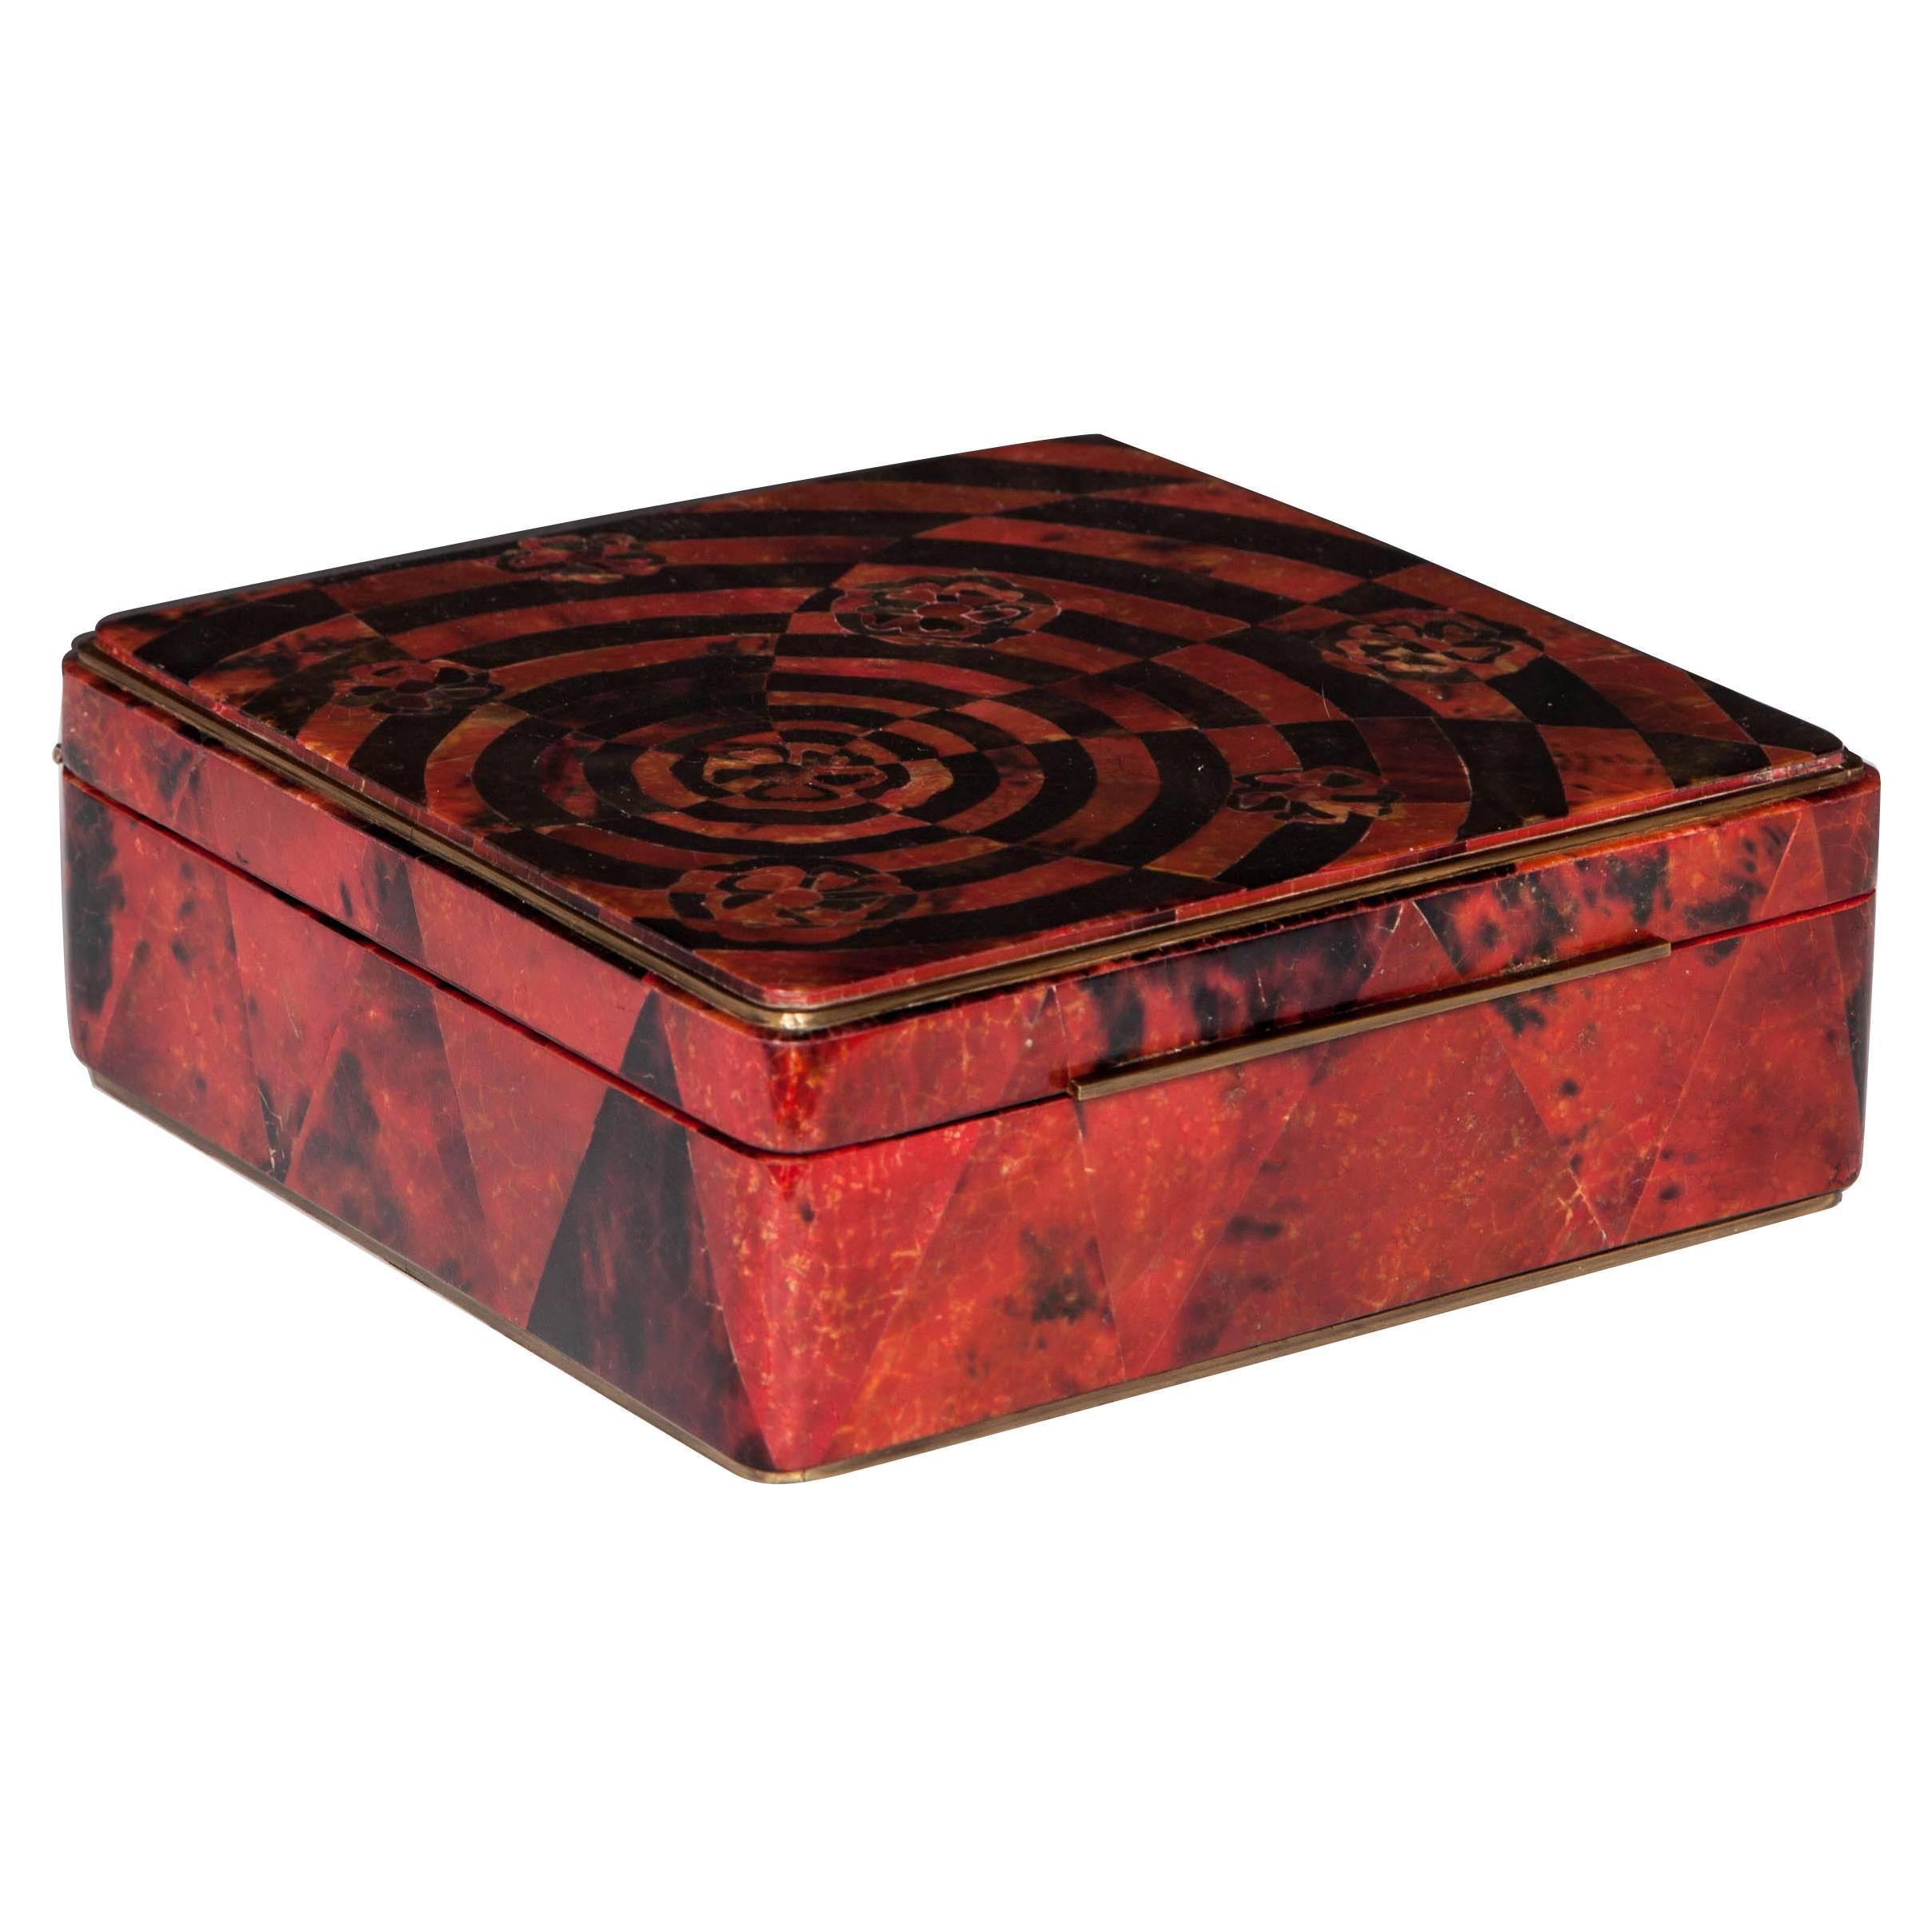 Pen Shell Box in Ruby Red with Geometric Inlay Design